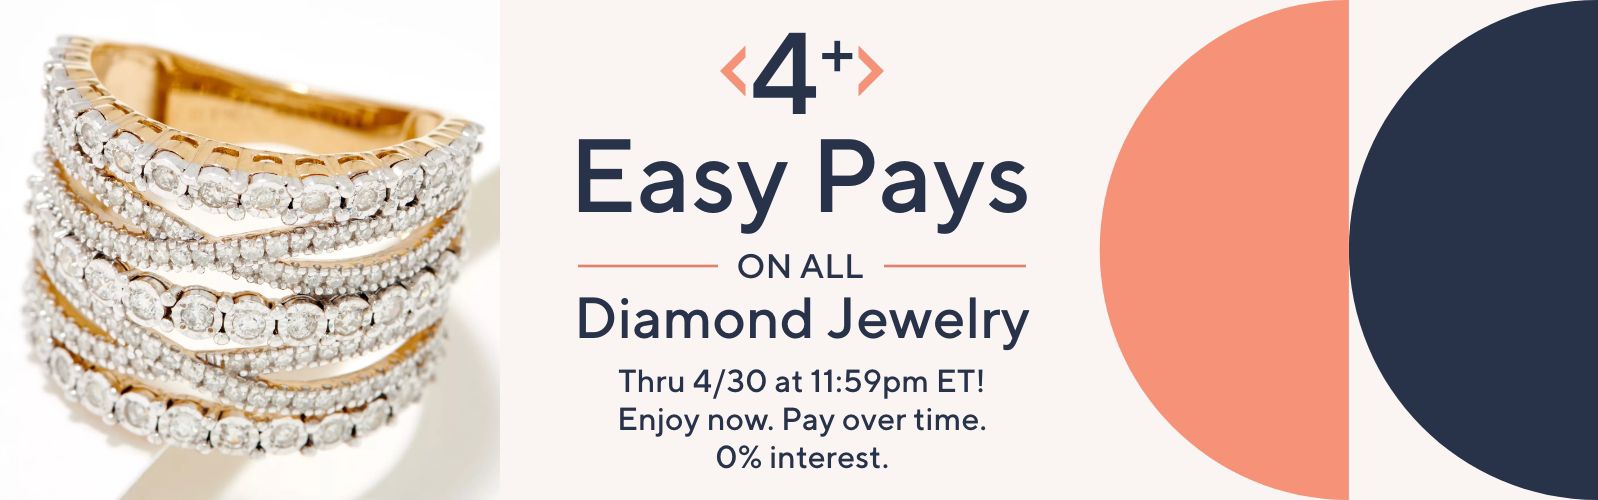 4+ Easy Pays on All Diamond Jewelry. Thru 4/30 at 11:59pm ET! Enjoy now. Pay over time. 0% interest.